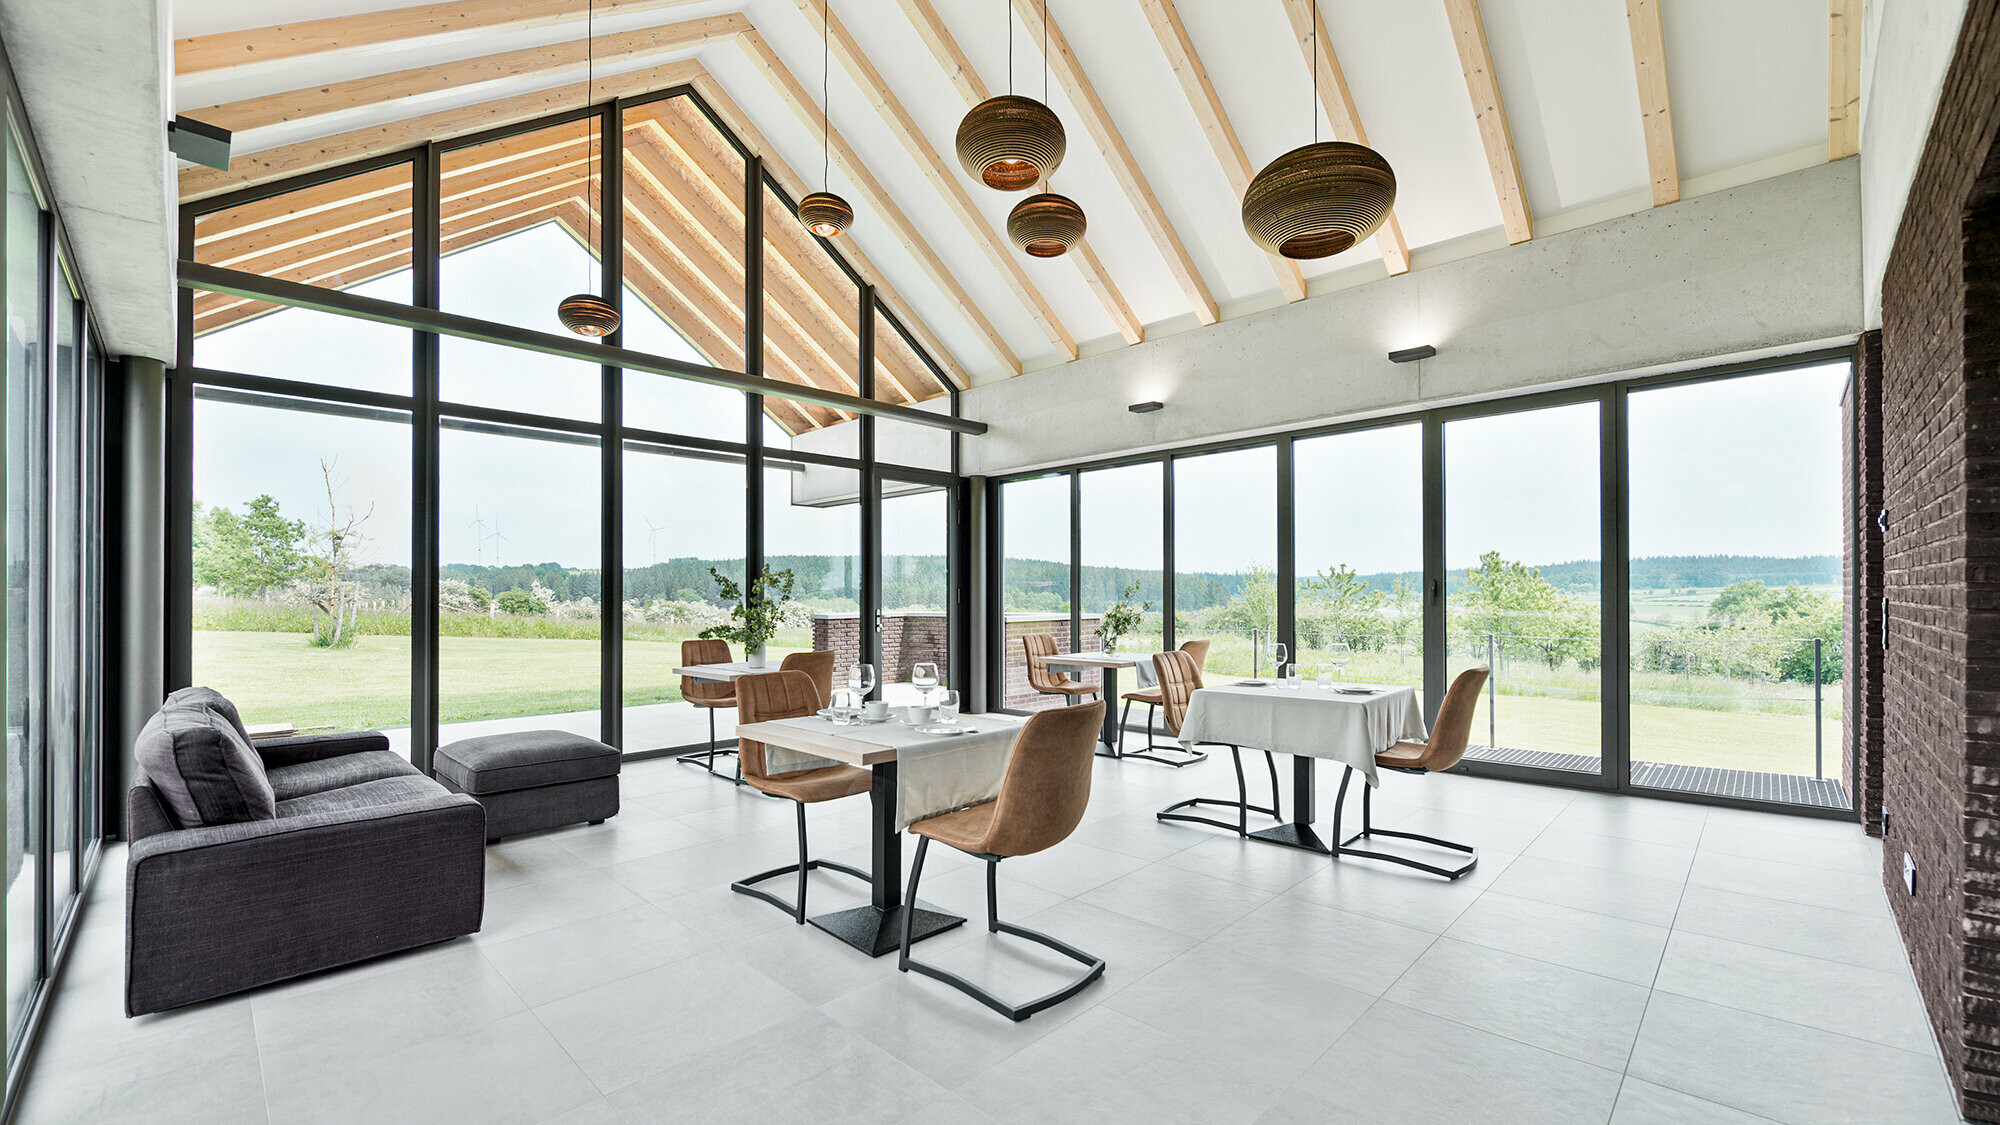 Interior view of the dining room in harmonious earth and beige tones. The generous glazing ernables a sweeping view of the Warche valley and the garden belonging to the owners of the accommodation.